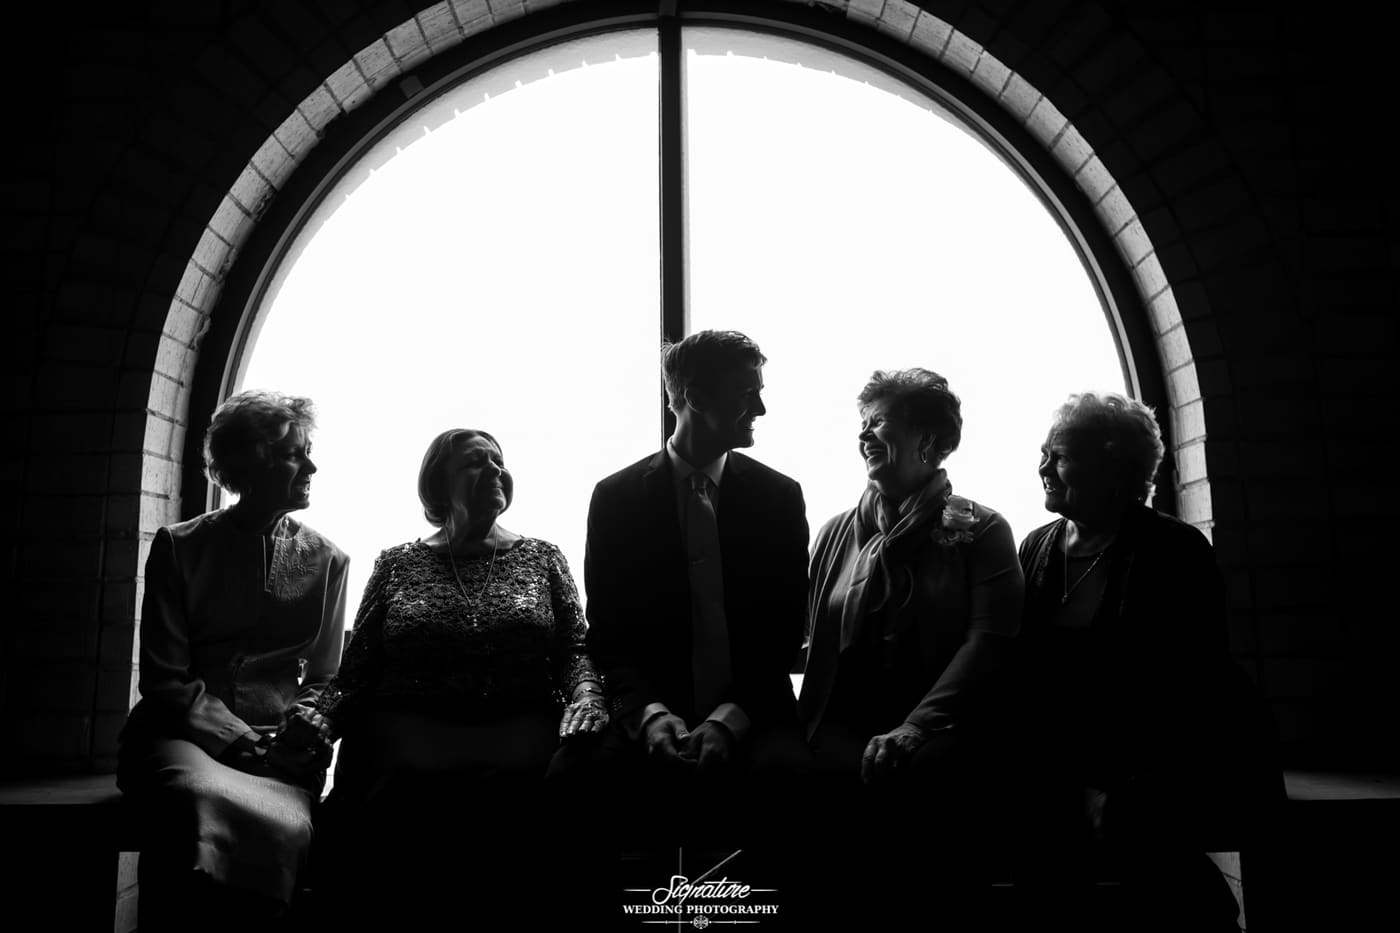 Groom with matriarch sitting in front of window silhouette black and white